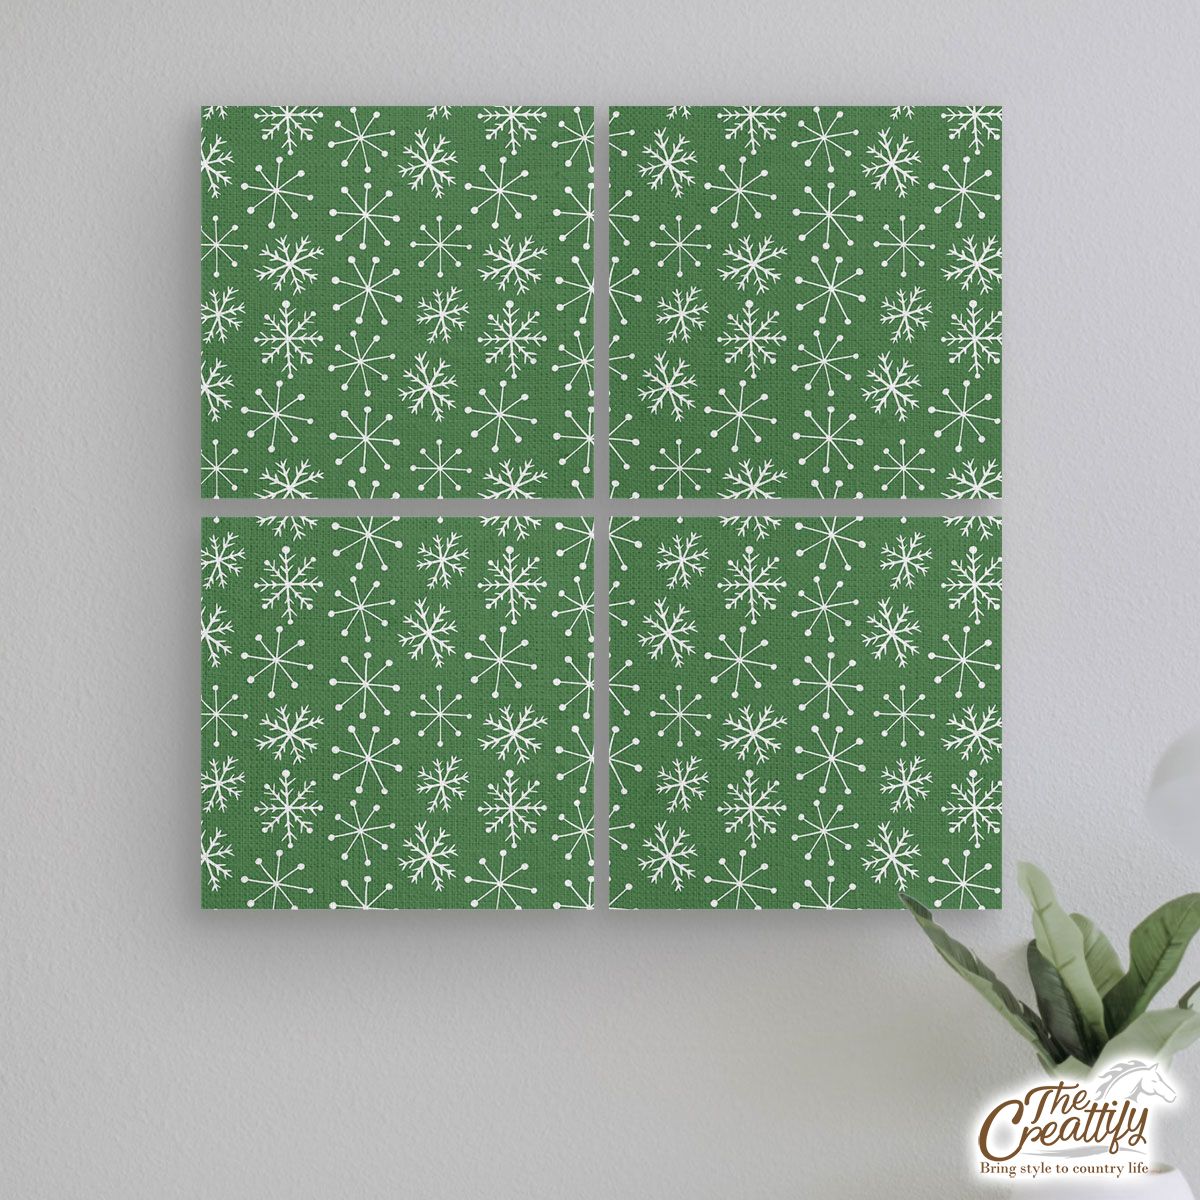 Green And White Snowflake Mural With Frame